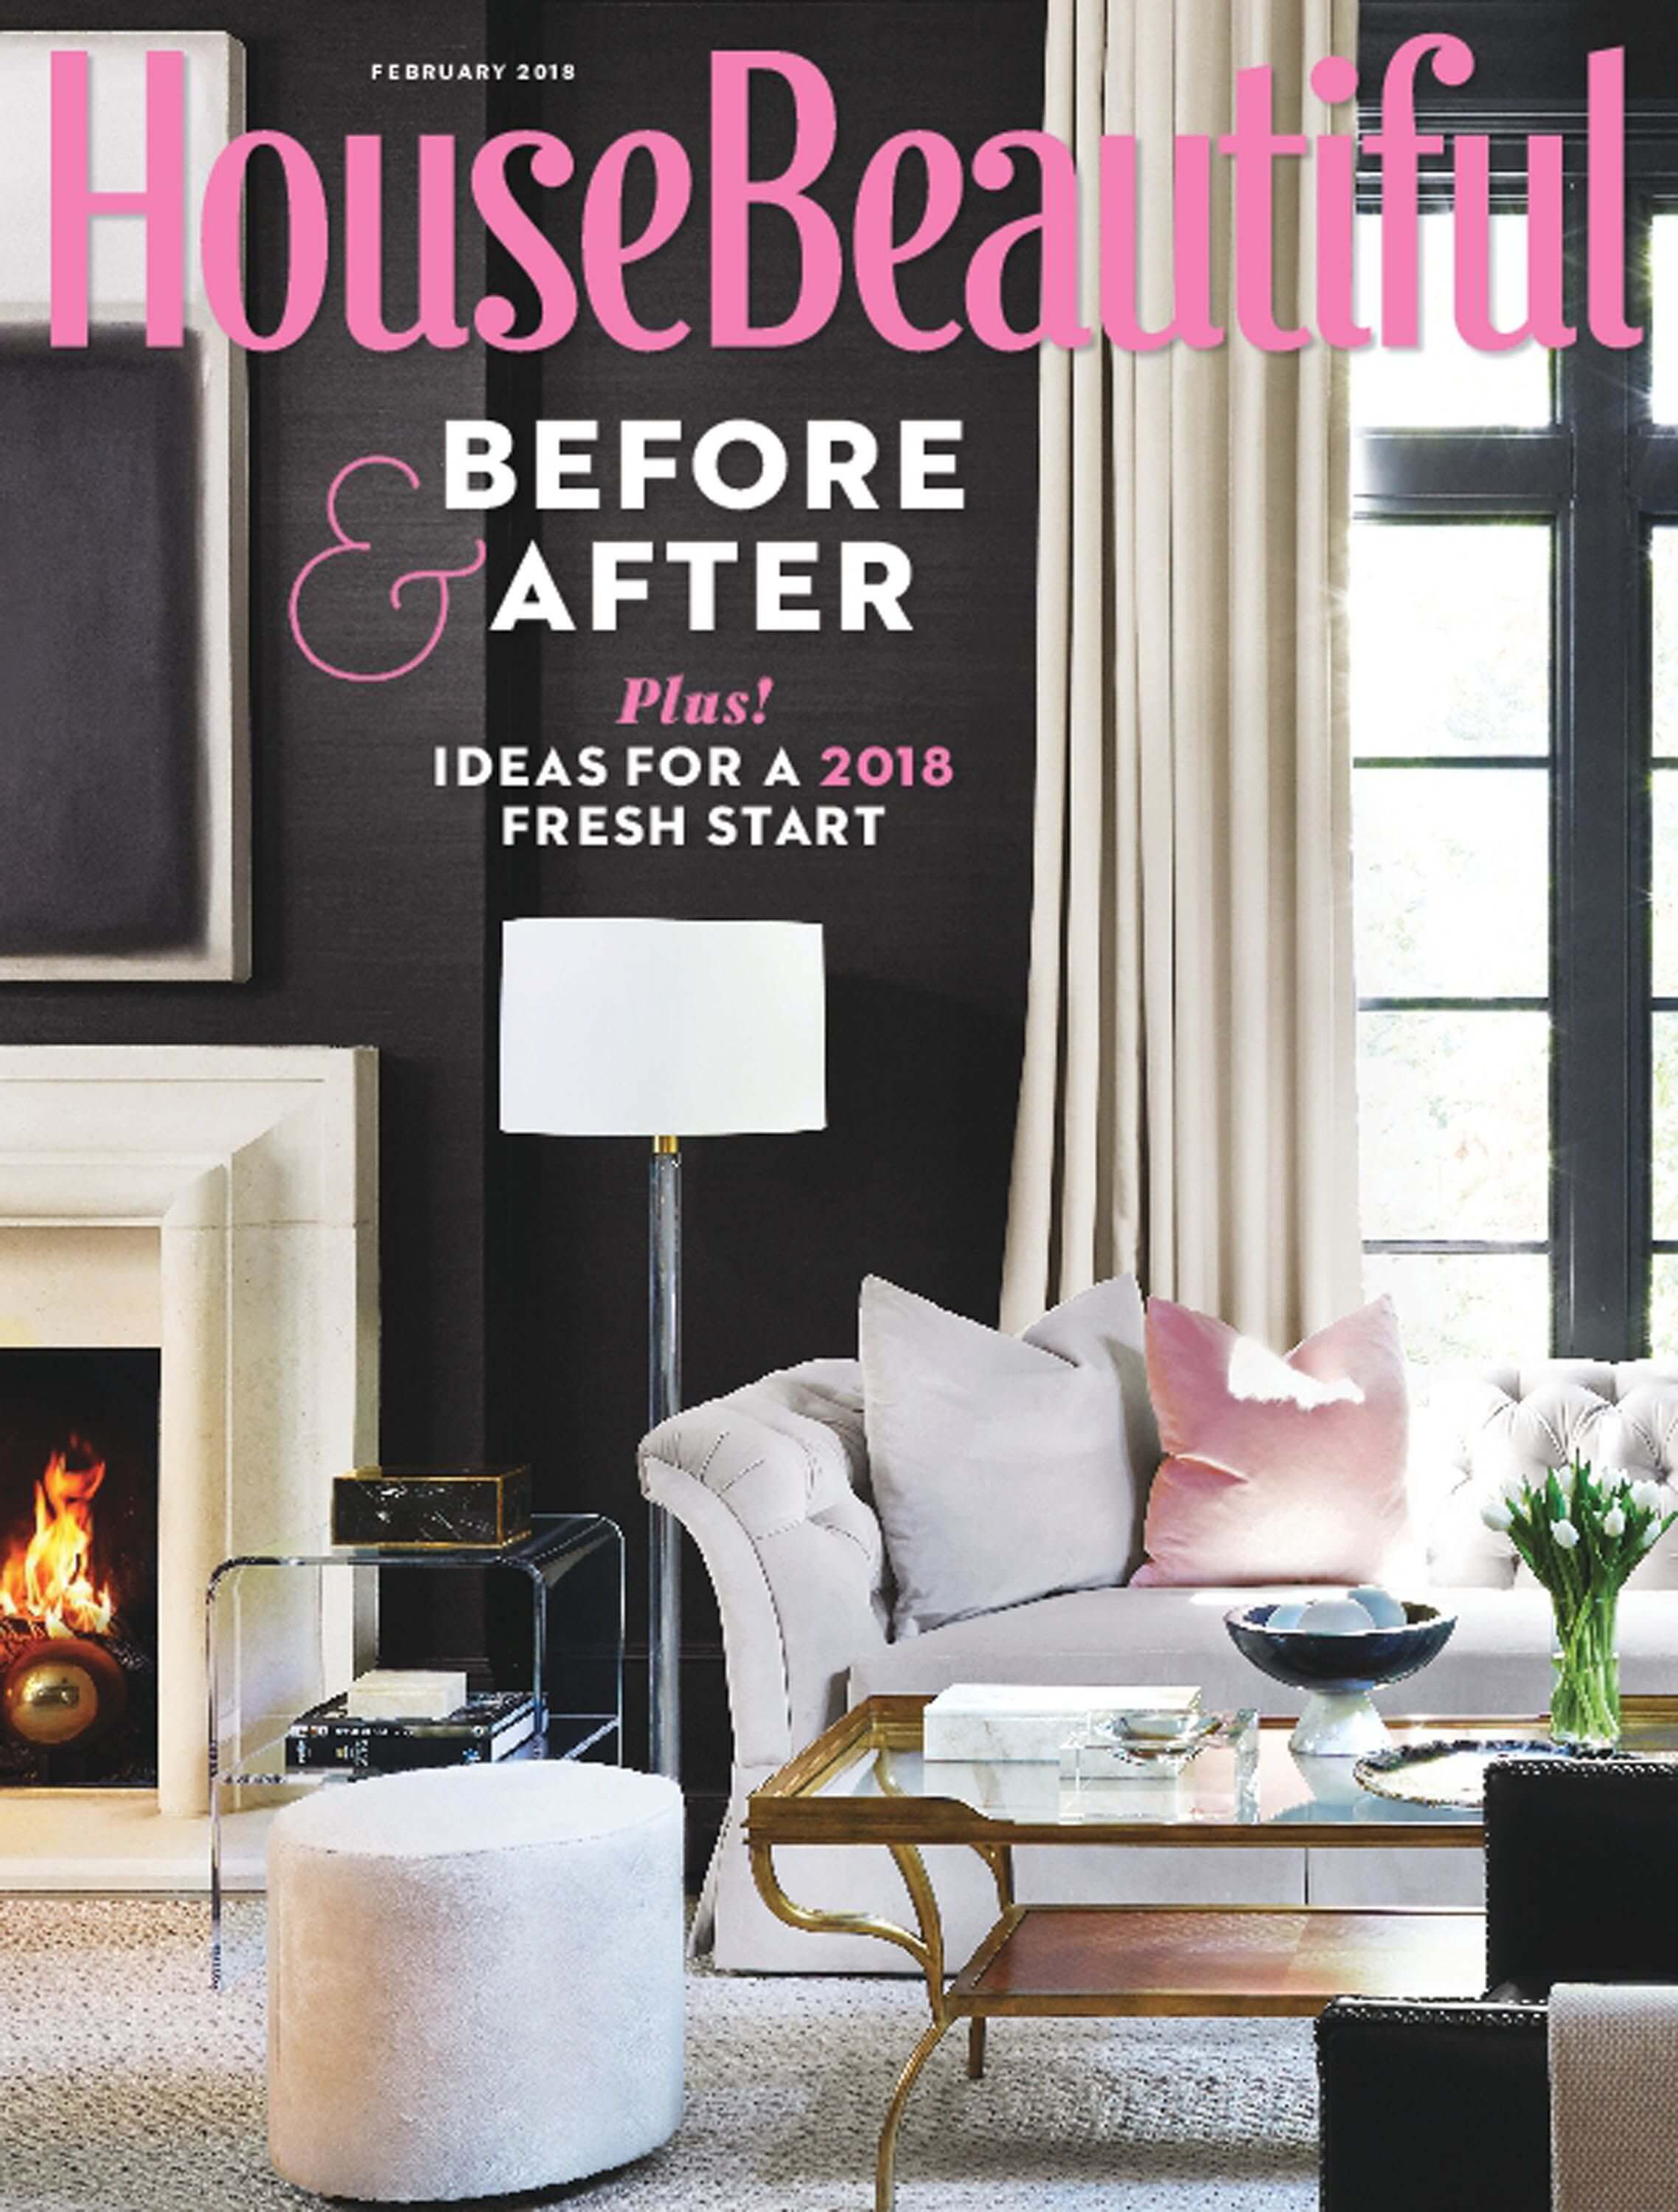 Top 25 Interior Design Magazines of 2018 that You Must Subscribe The